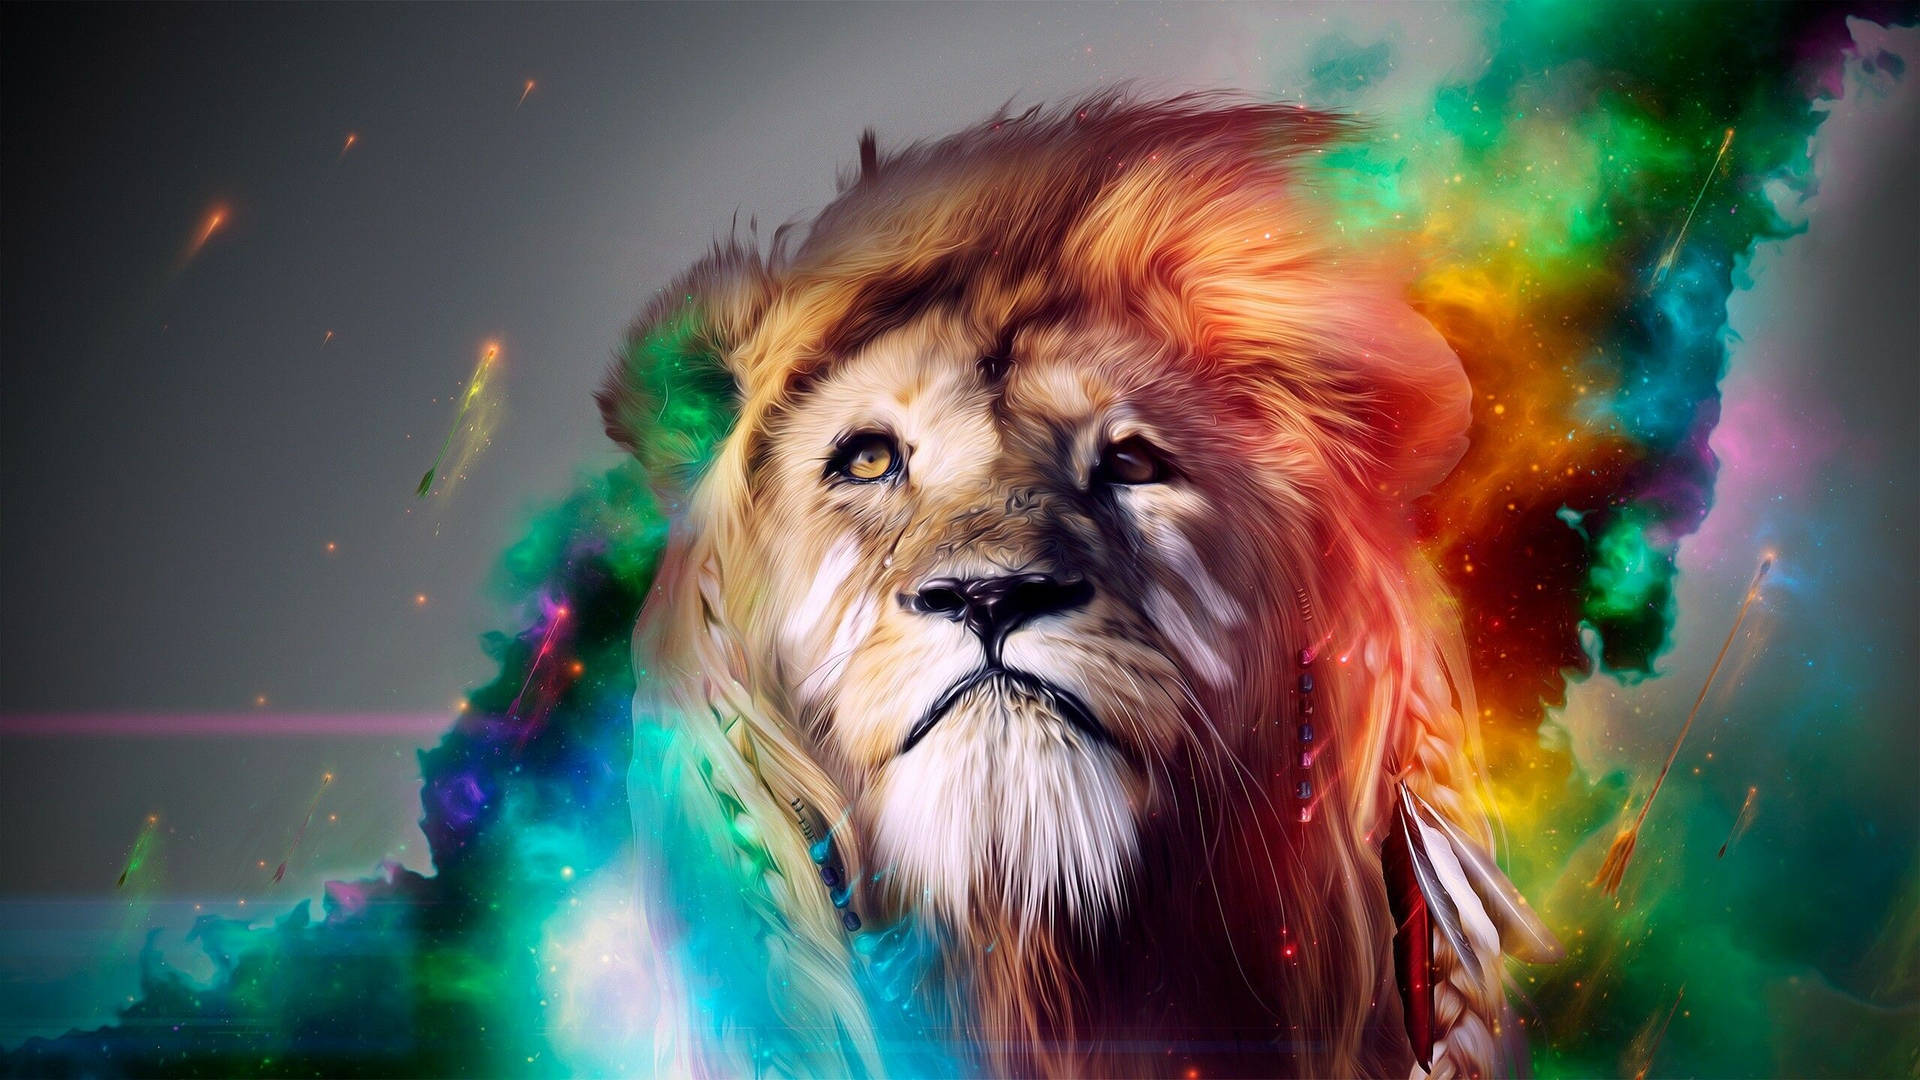 Cool Picture Art Of Lion Background